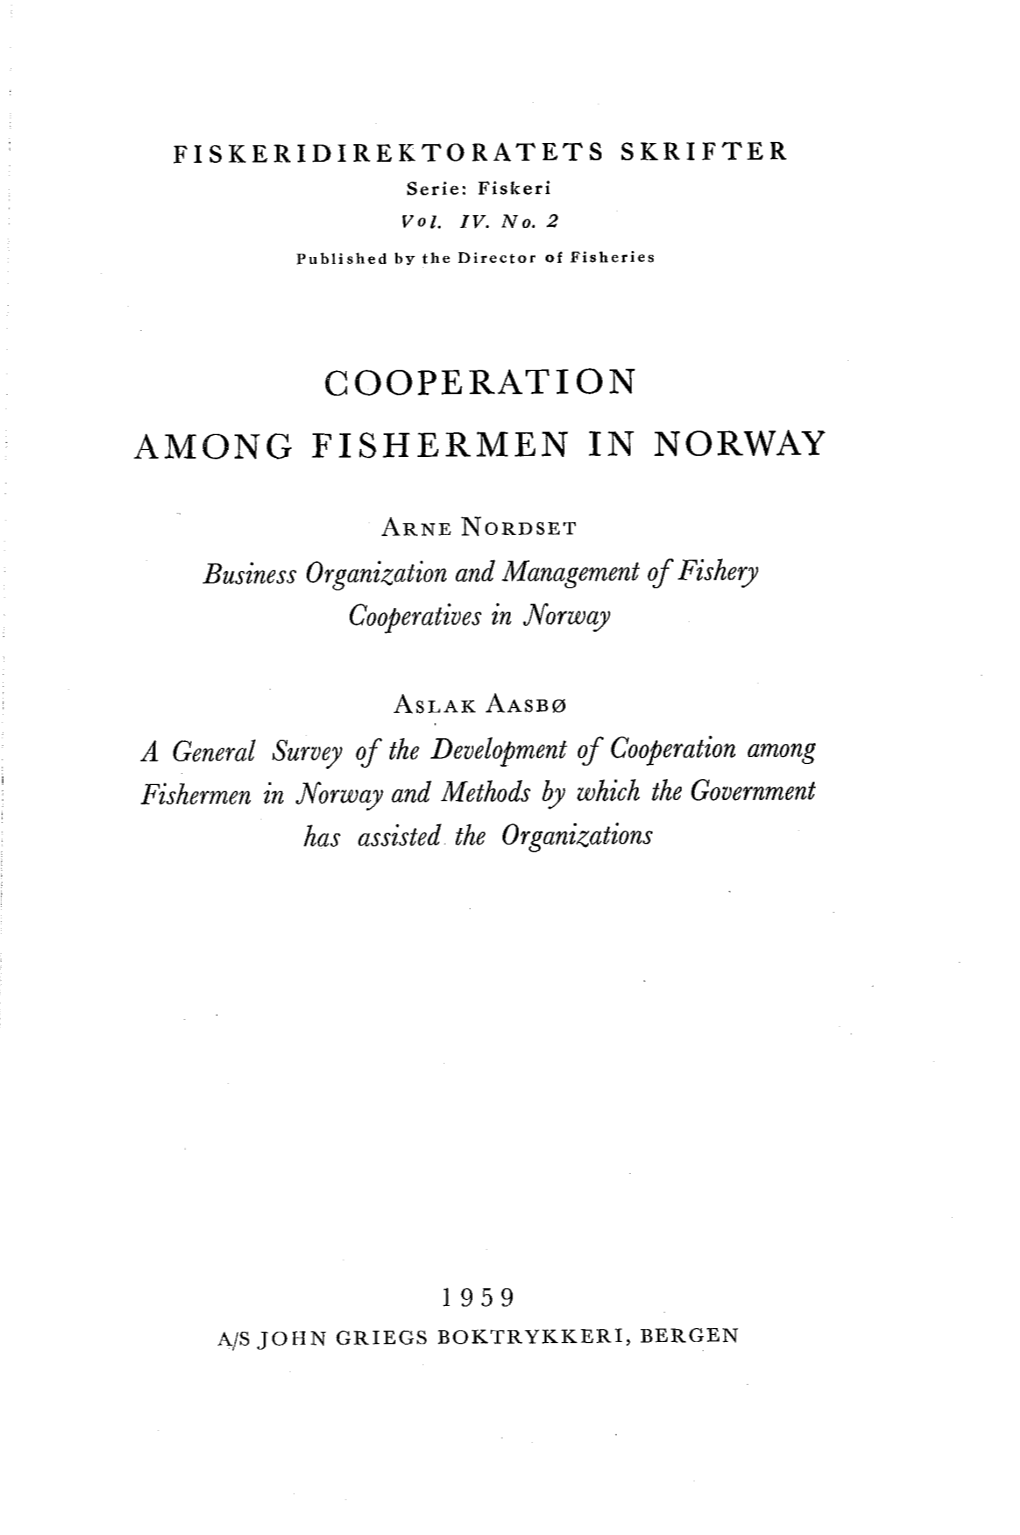 Cooperation Among Fishermen in Norway and Methods 6Y Which the Government Has Assisted the Organizations